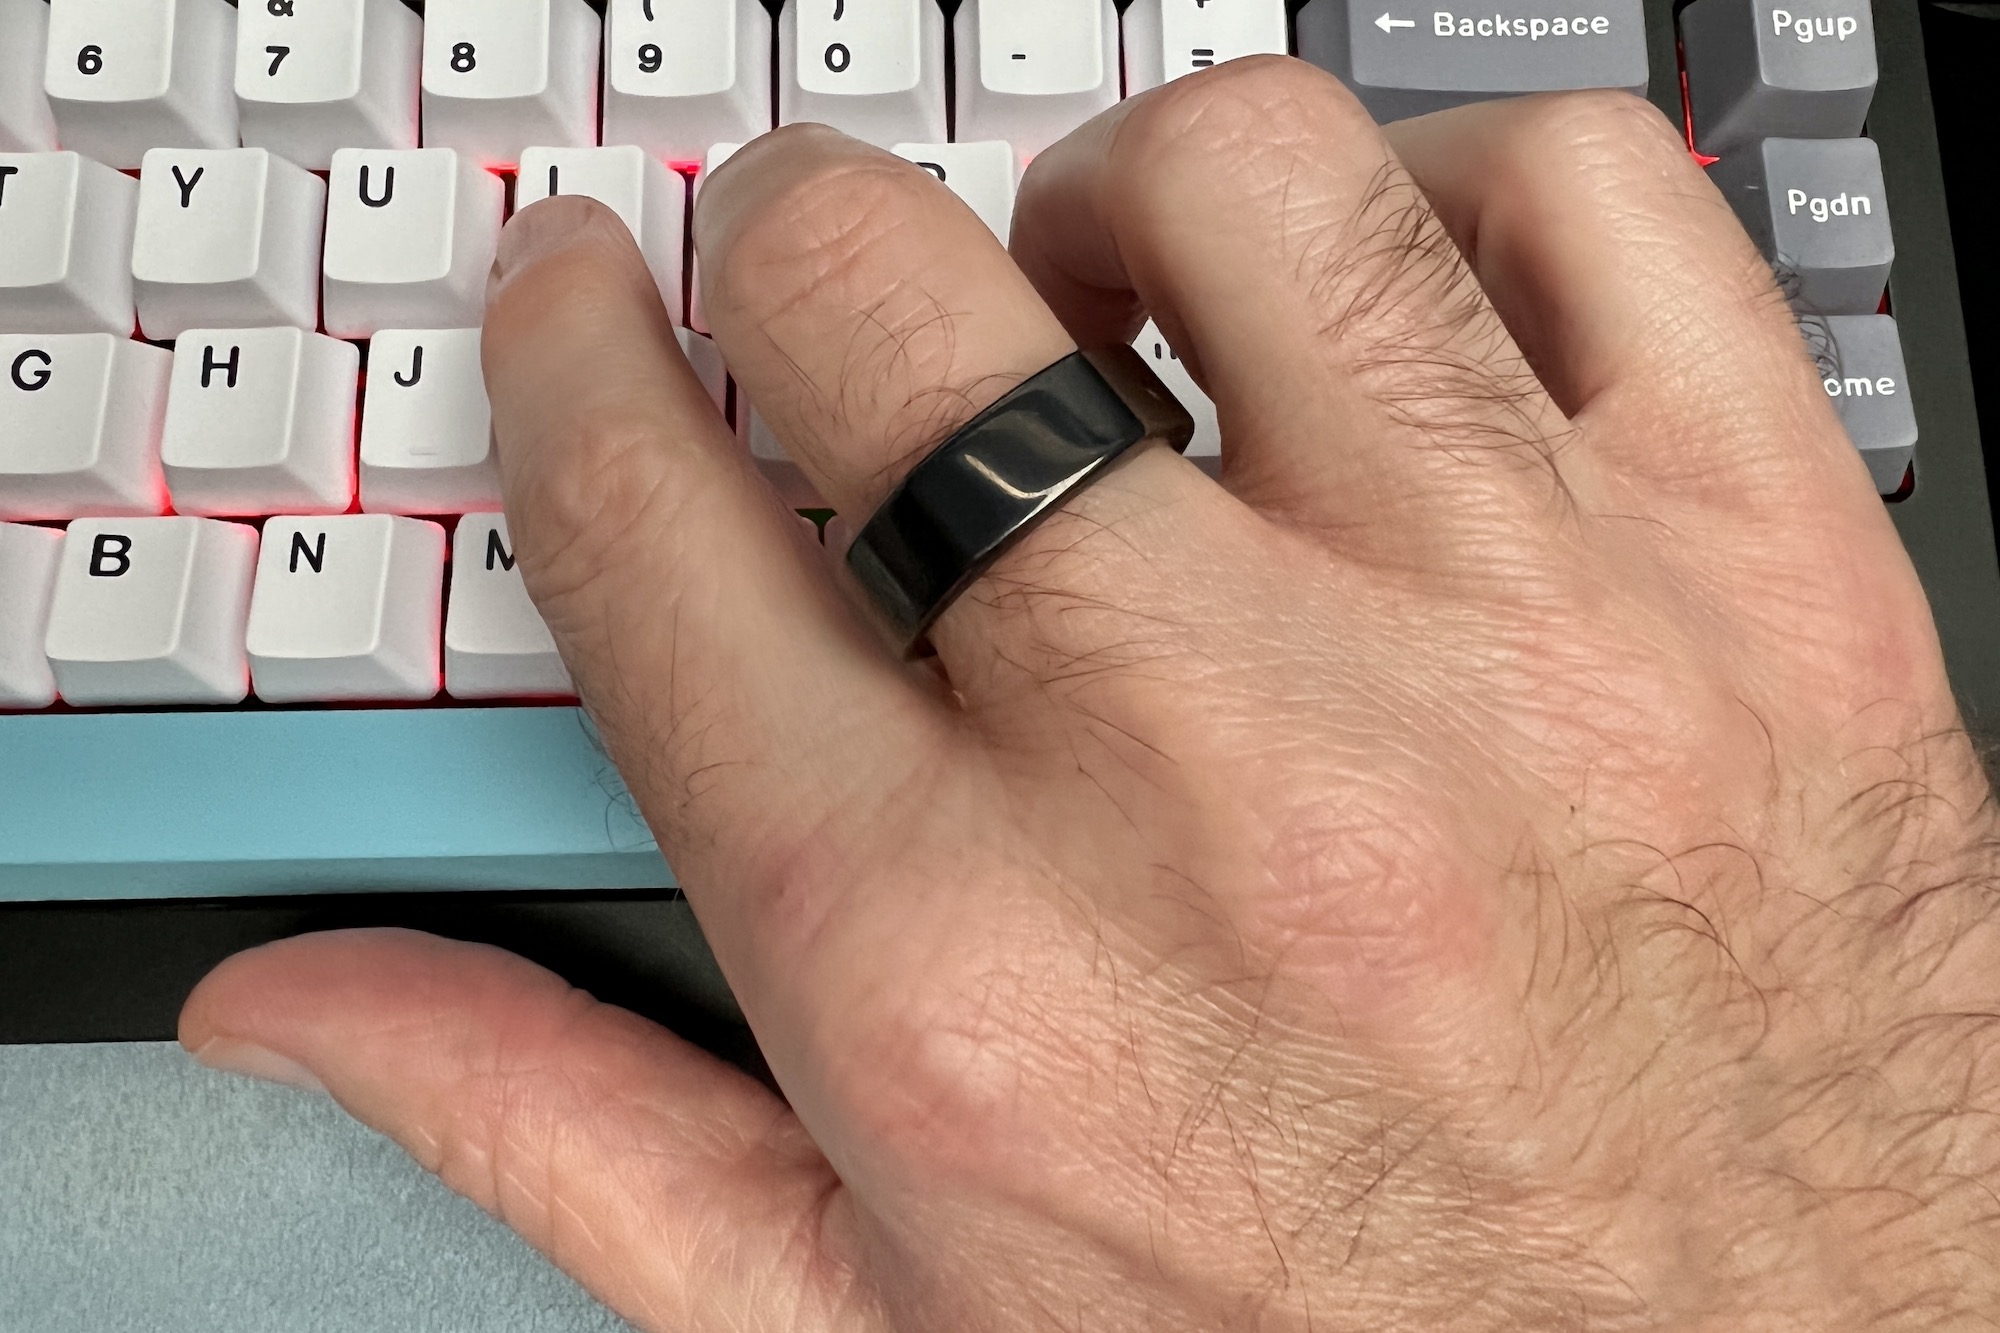 Oura Ring Review: Is the generation 3 model worth the money?